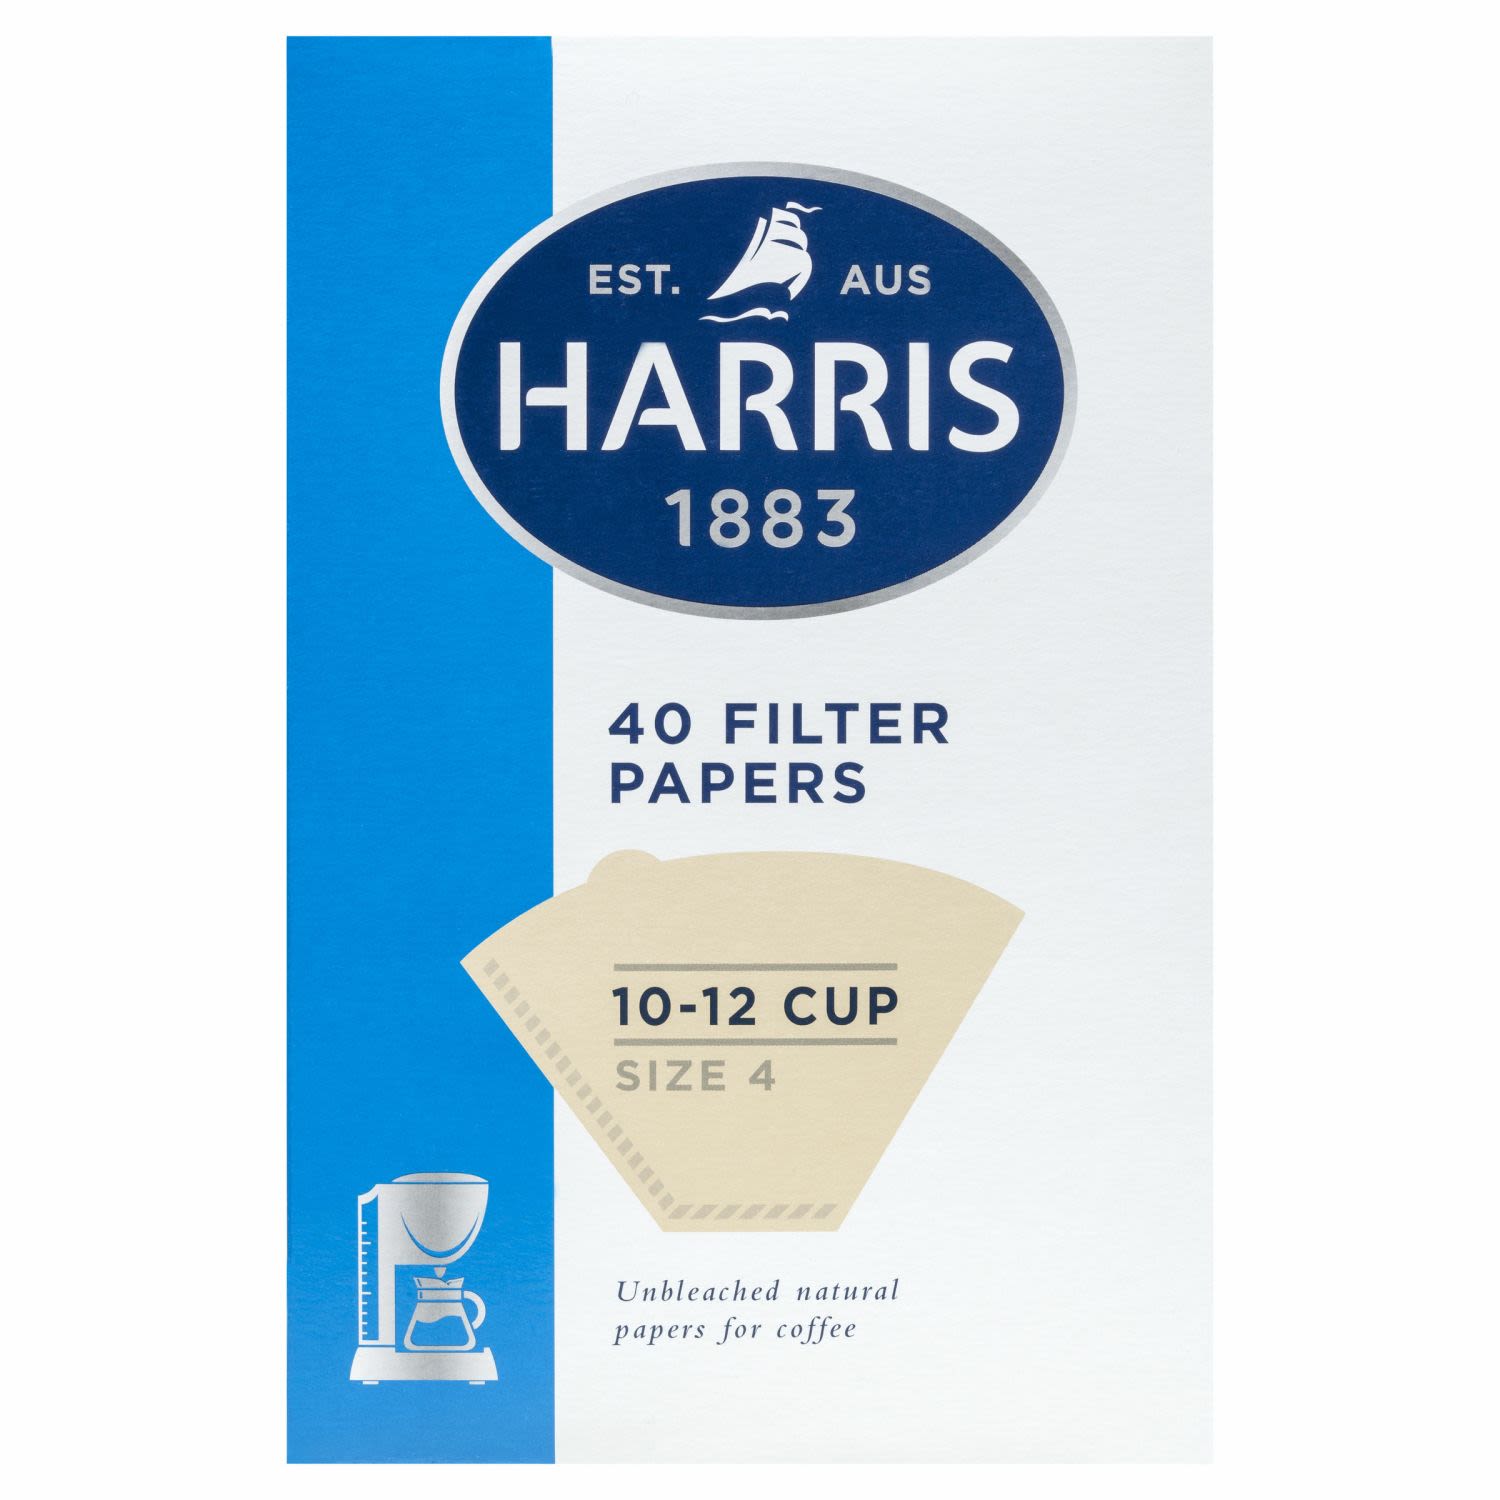 Harris Filter Papers 10-12 Cup, 40 Each